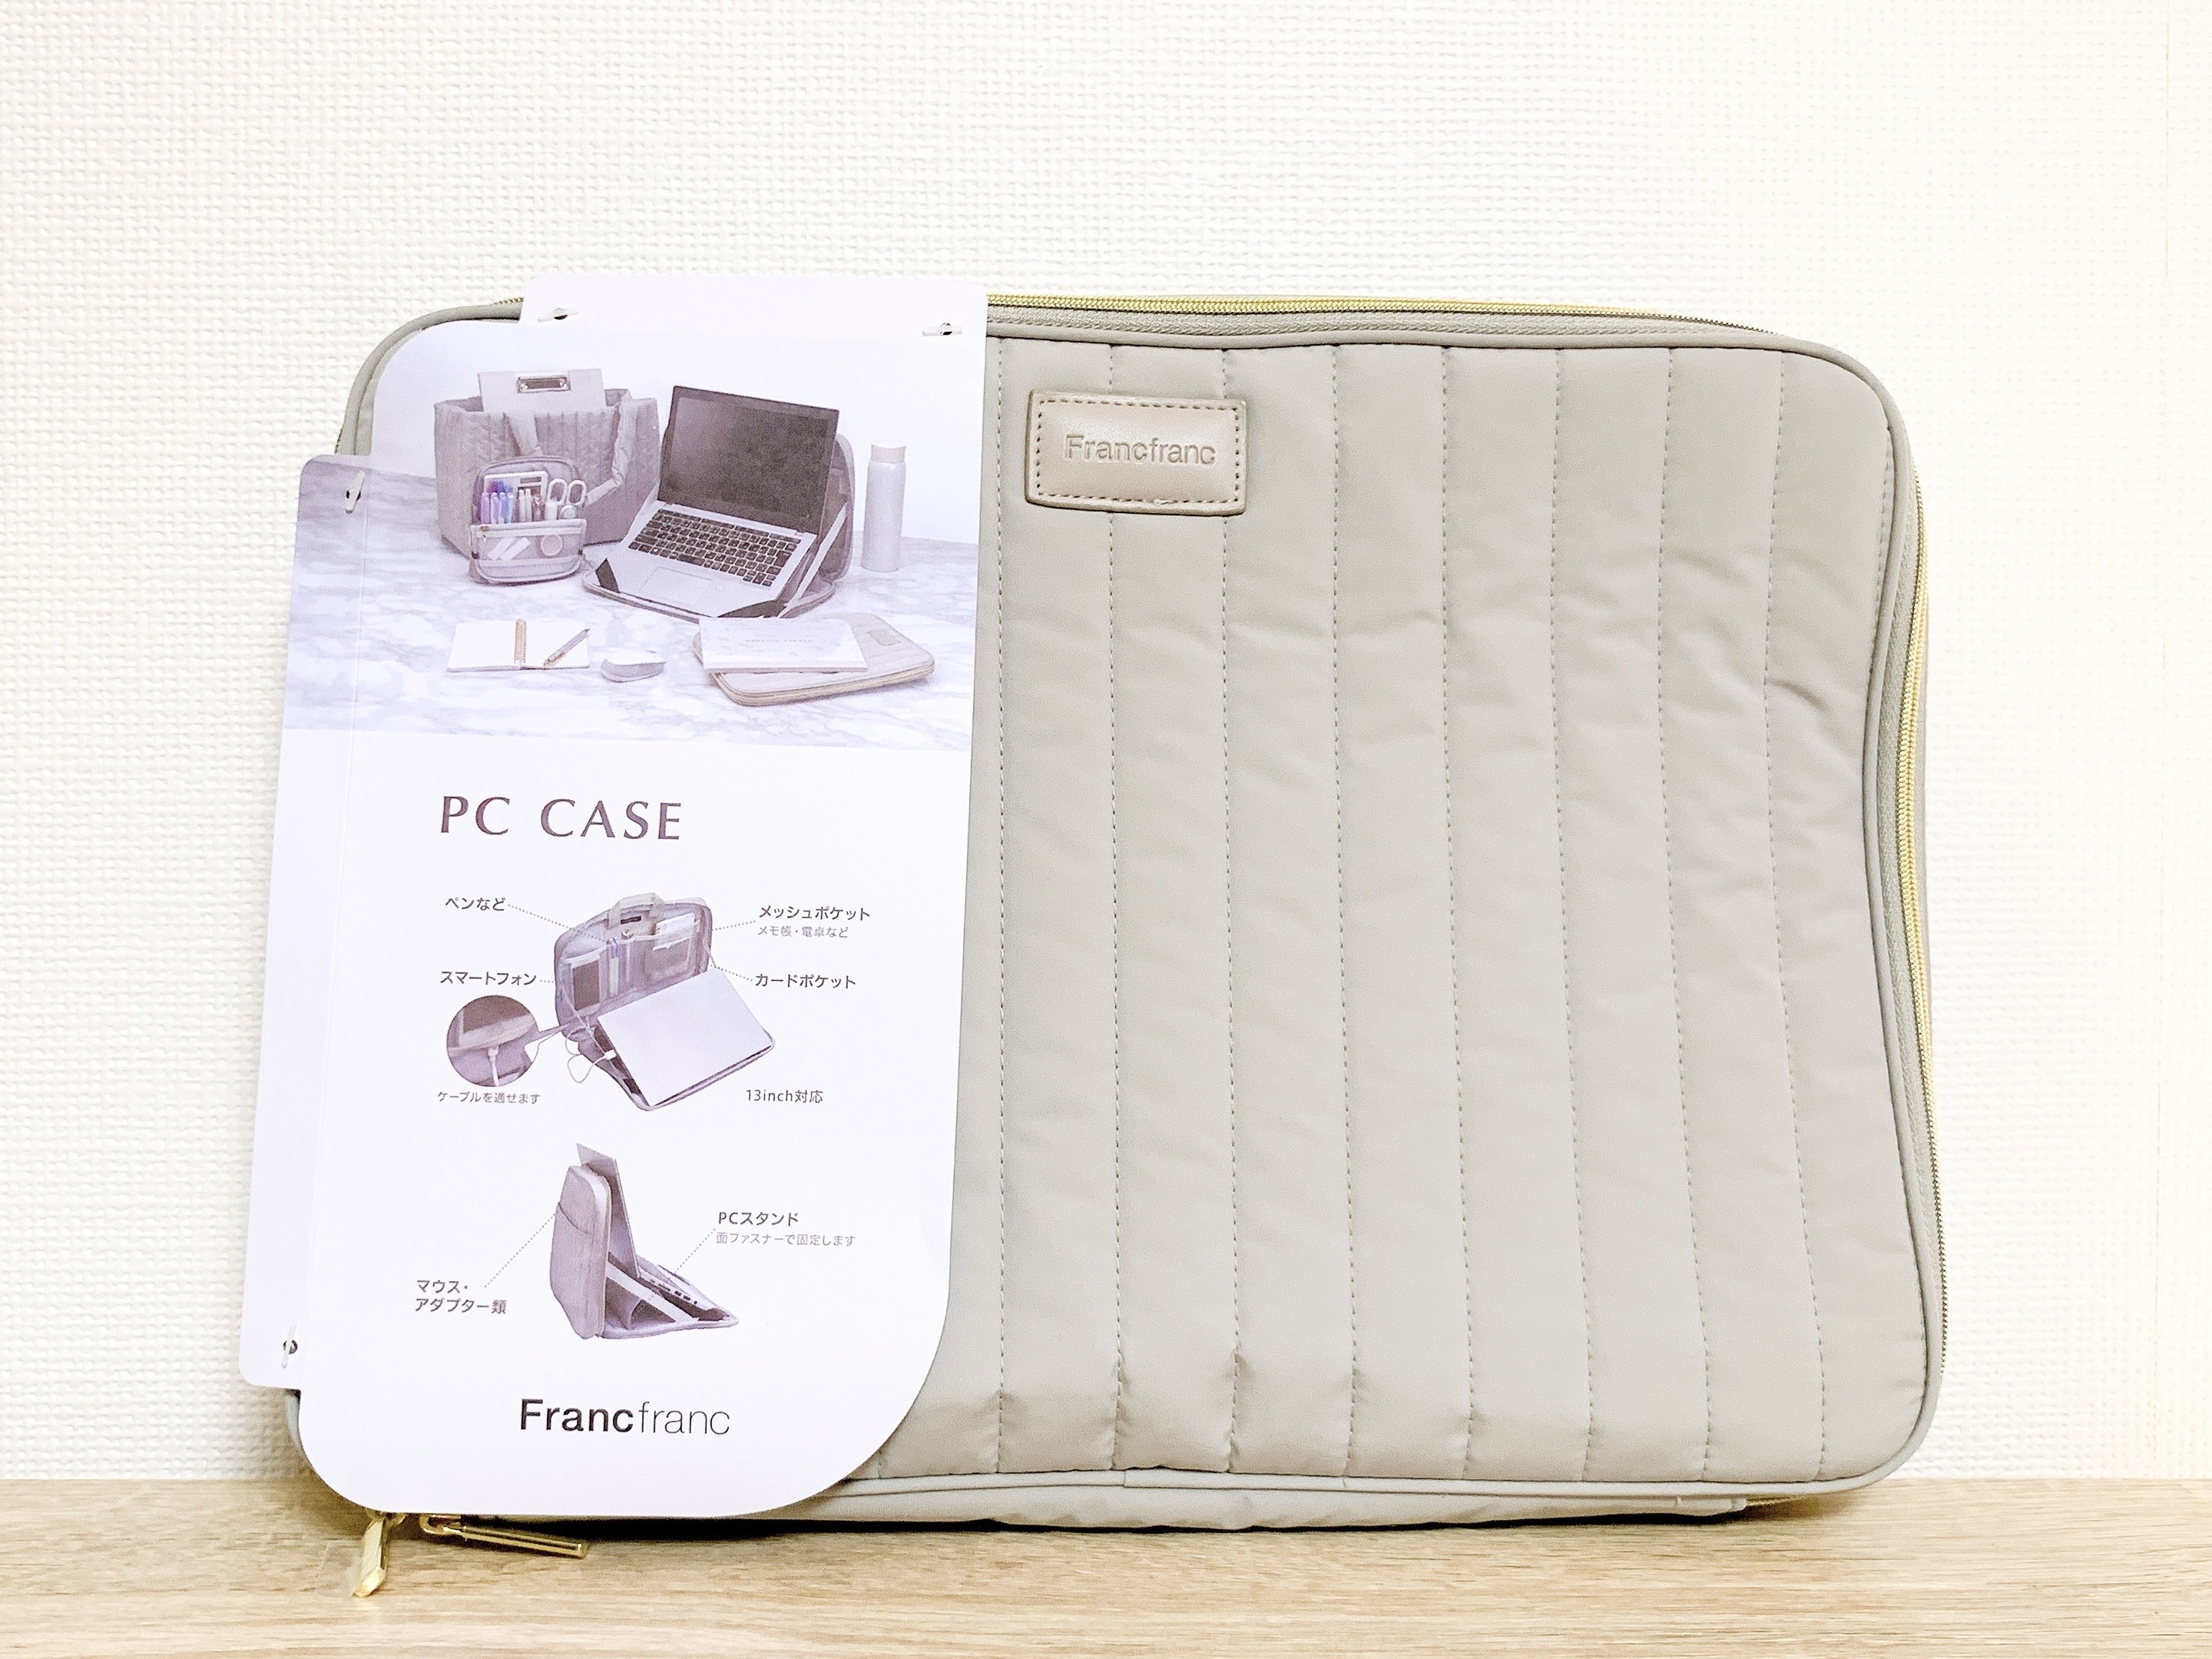 Francfranc PC CASE and TOOLPENSTANDPOUCH